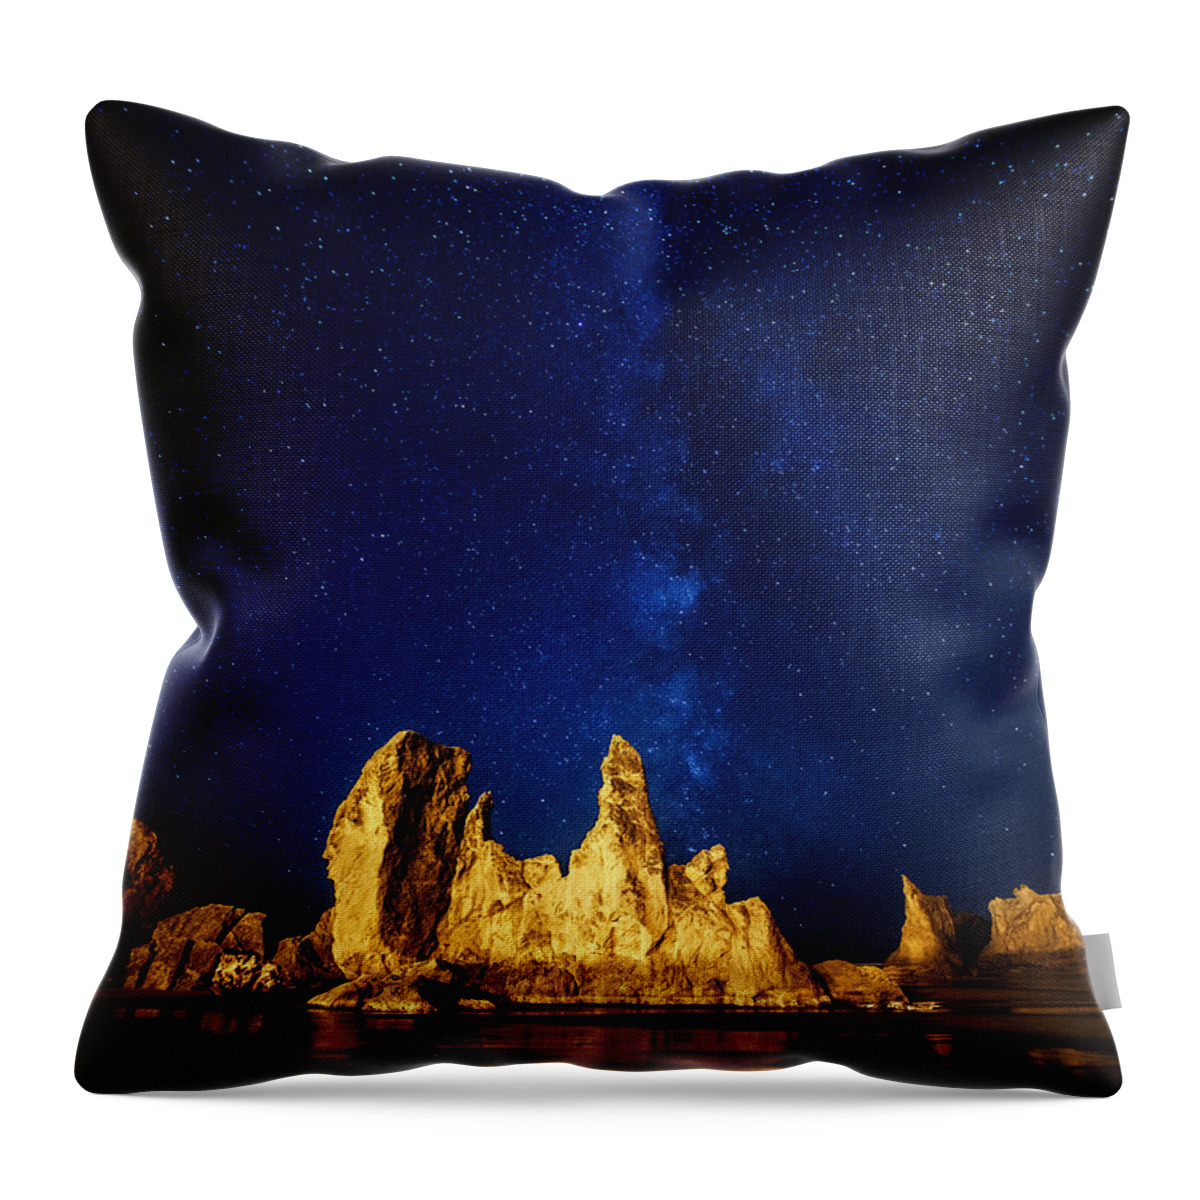 Stars Throw Pillow featuring the photograph Oregon Nights by Darren White